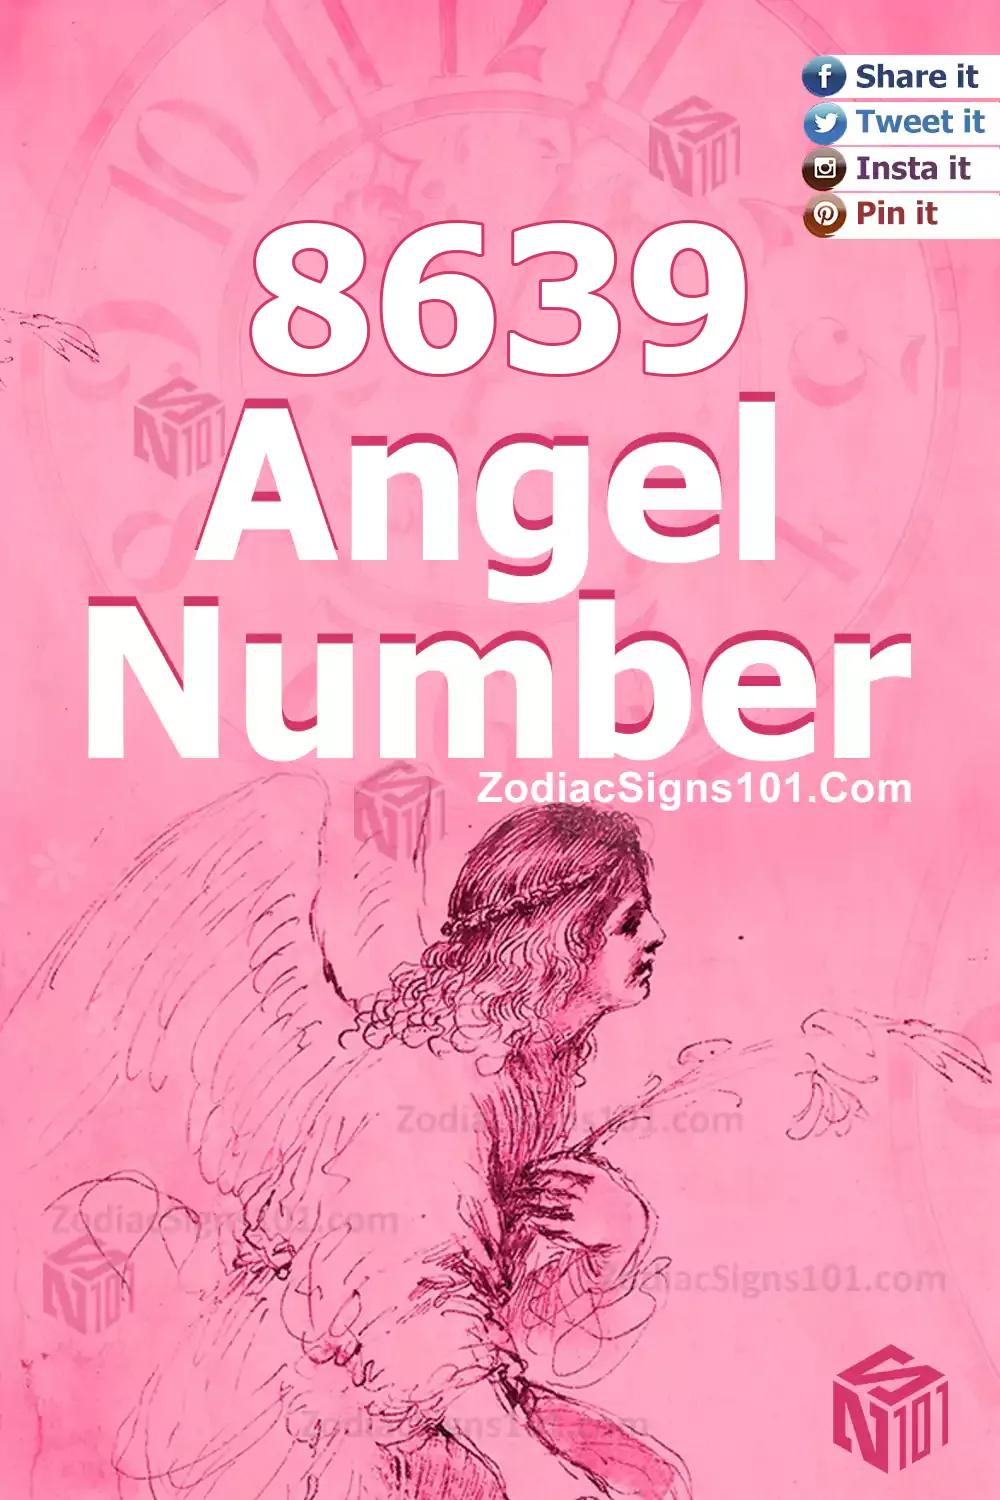 8639 Angel Number Meaning